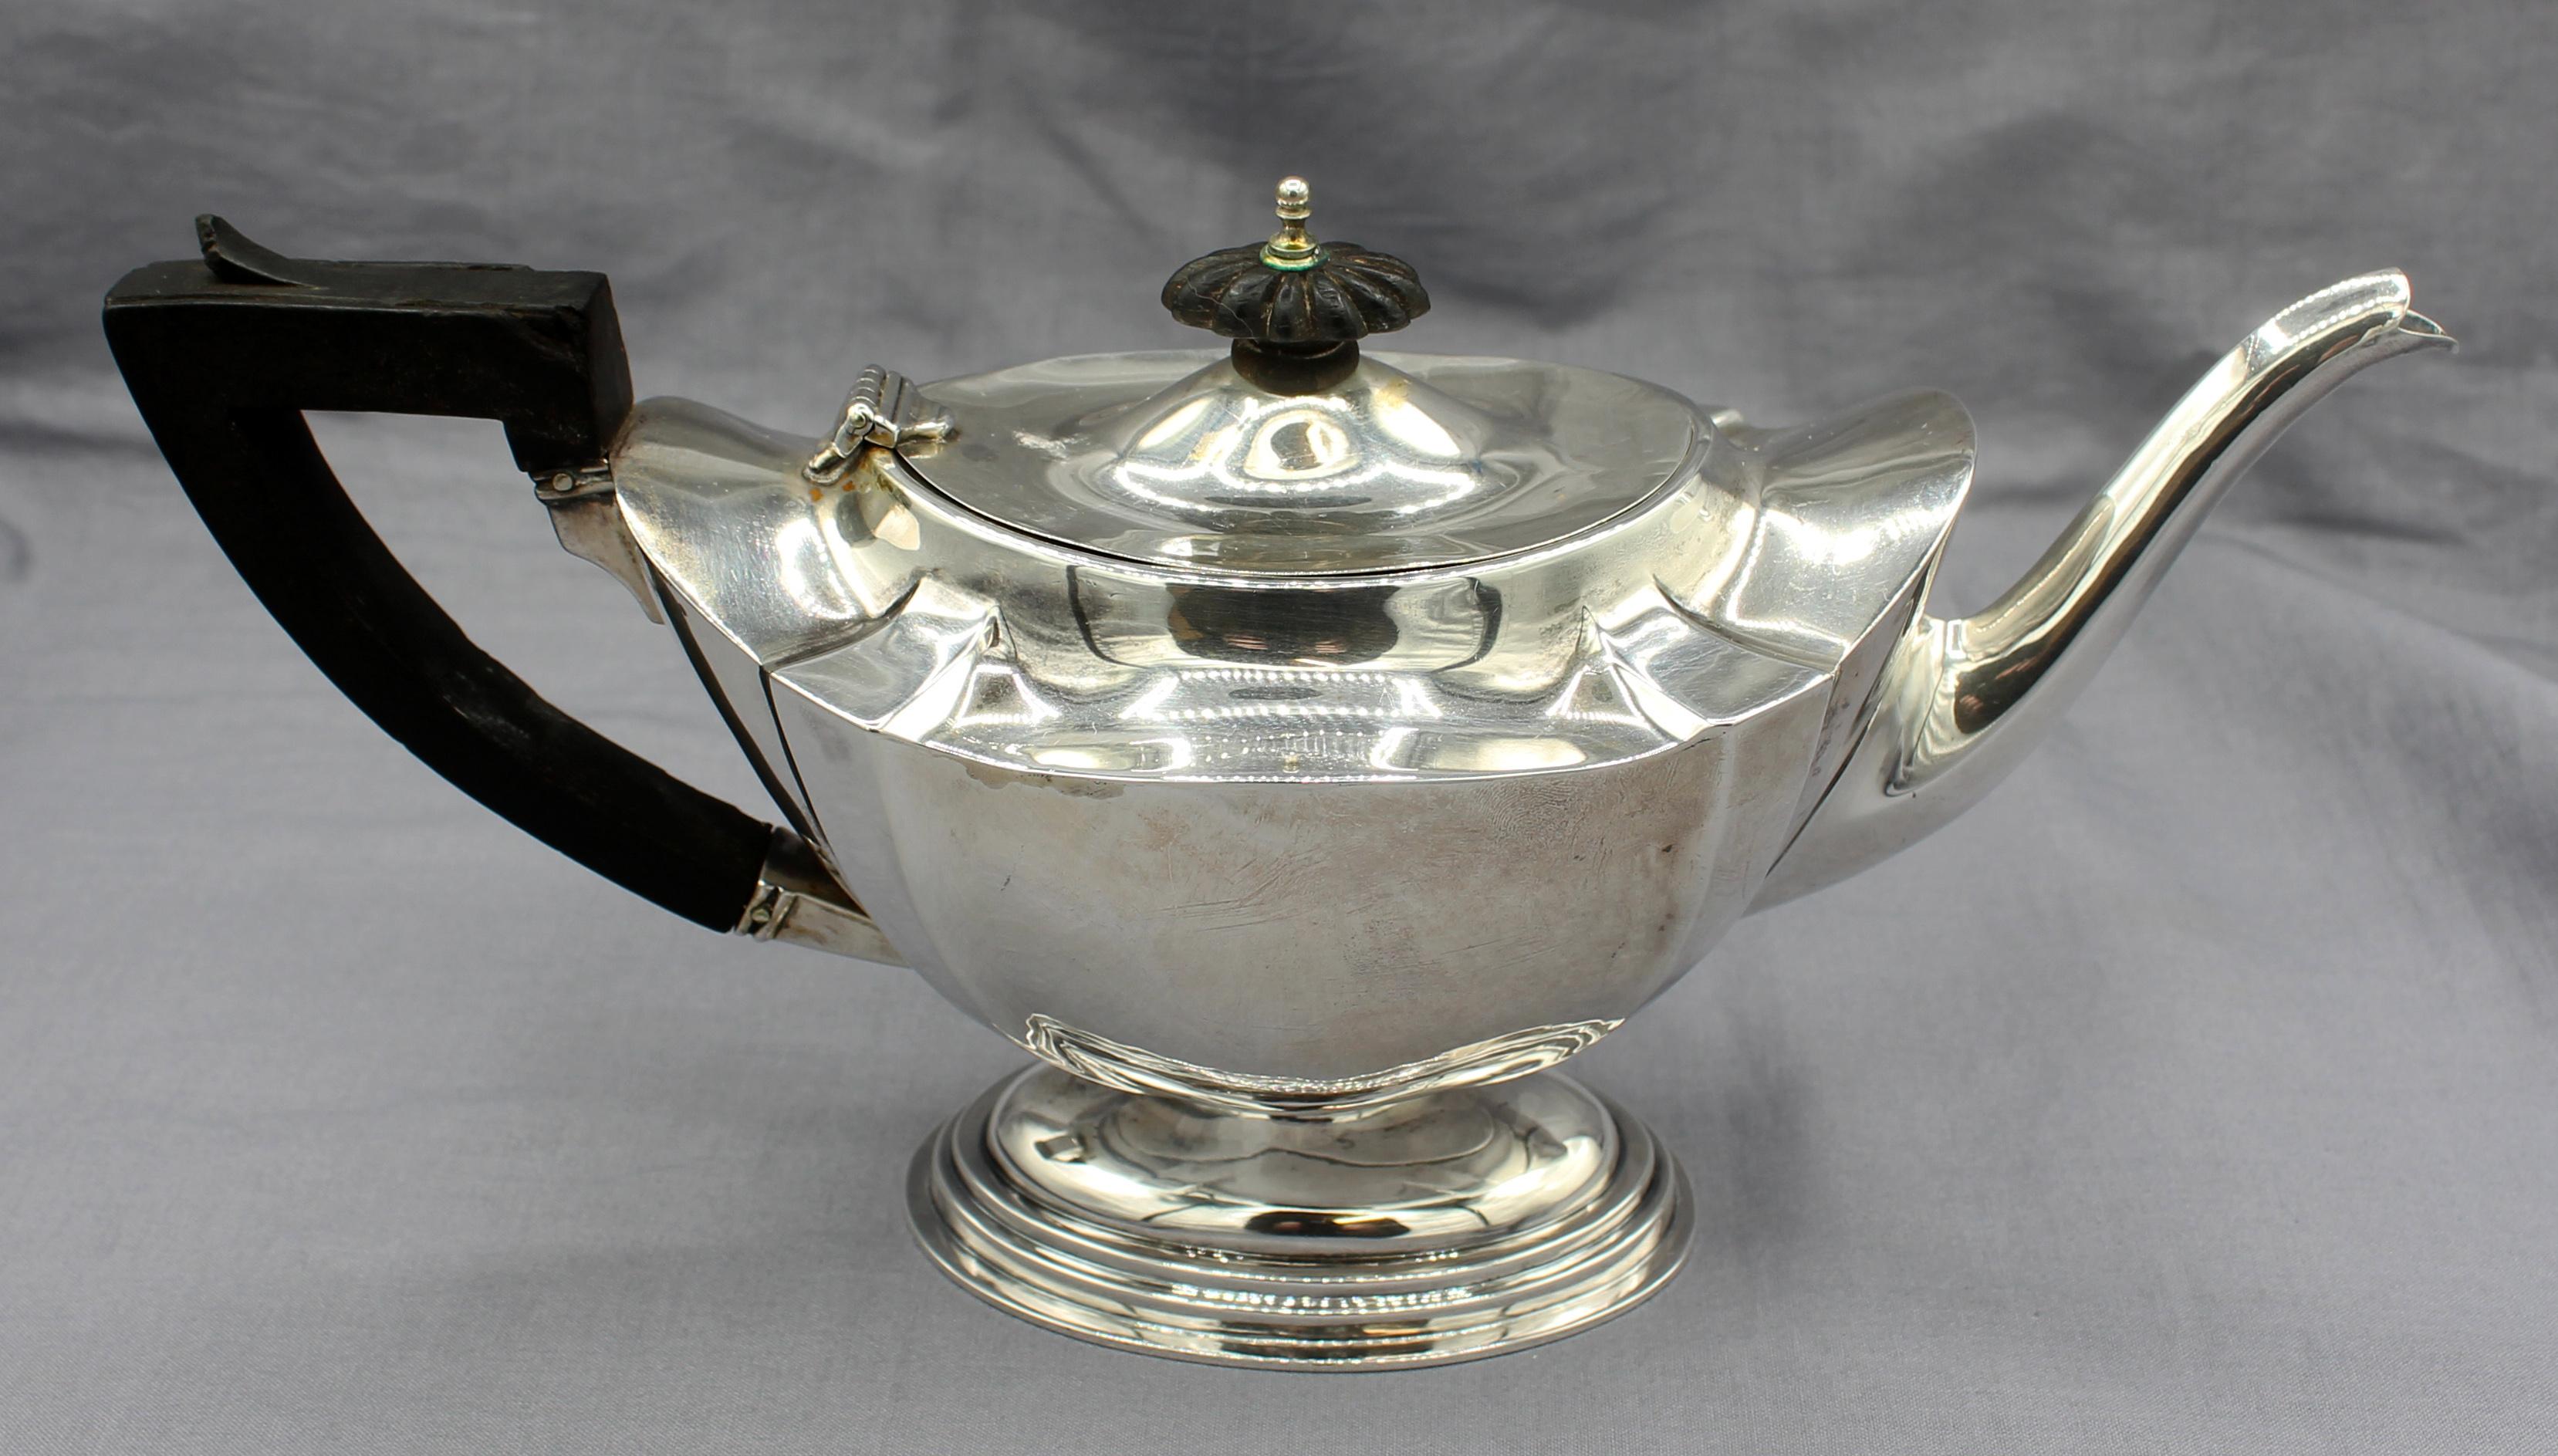 1912 English Neoclassical Revival Sterling Teapot In Good Condition For Sale In Chapel Hill, NC